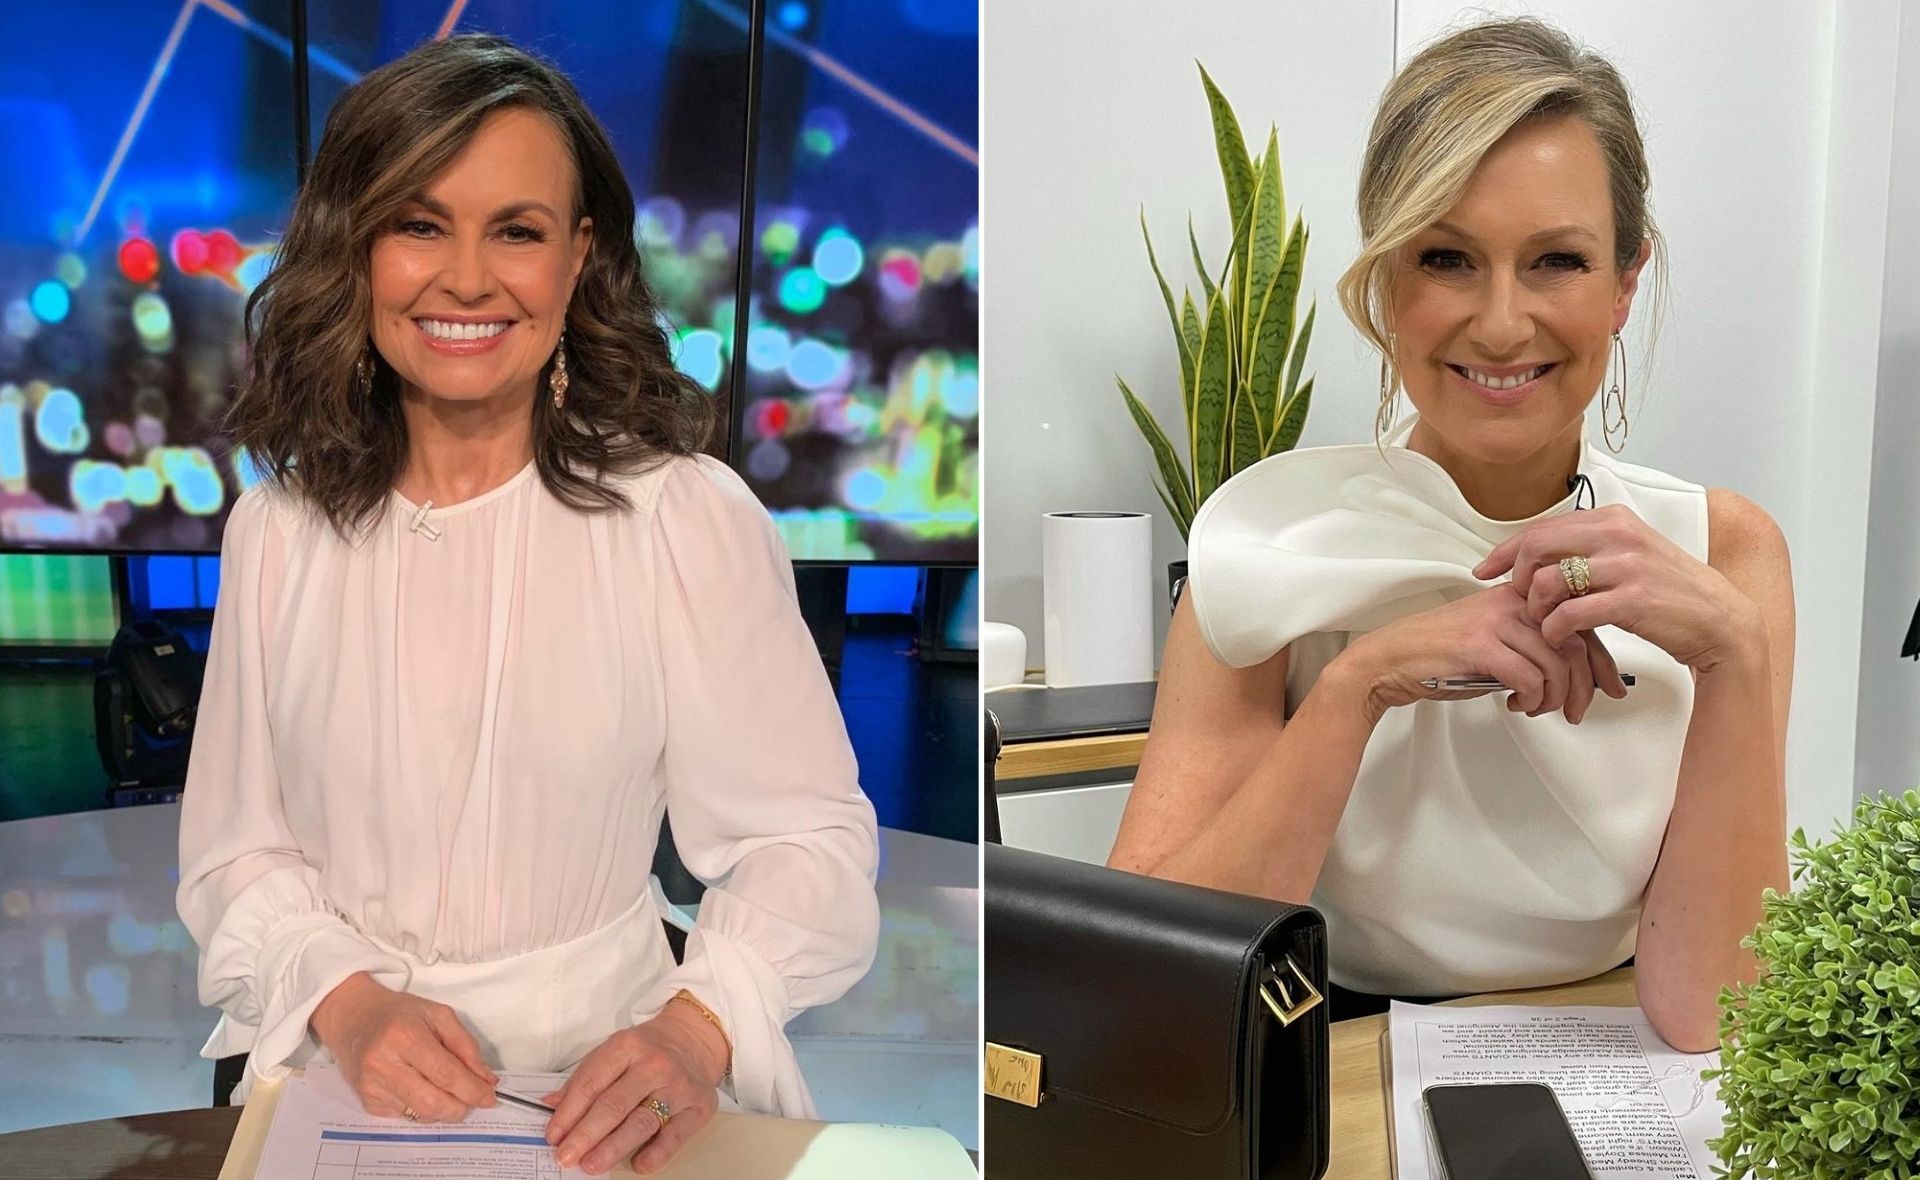 “I reckon a talk show could be an absolute goer for us down the track!!”: Breakfast TV stars Lisa Wilkinson and Melissa Doyle reunite